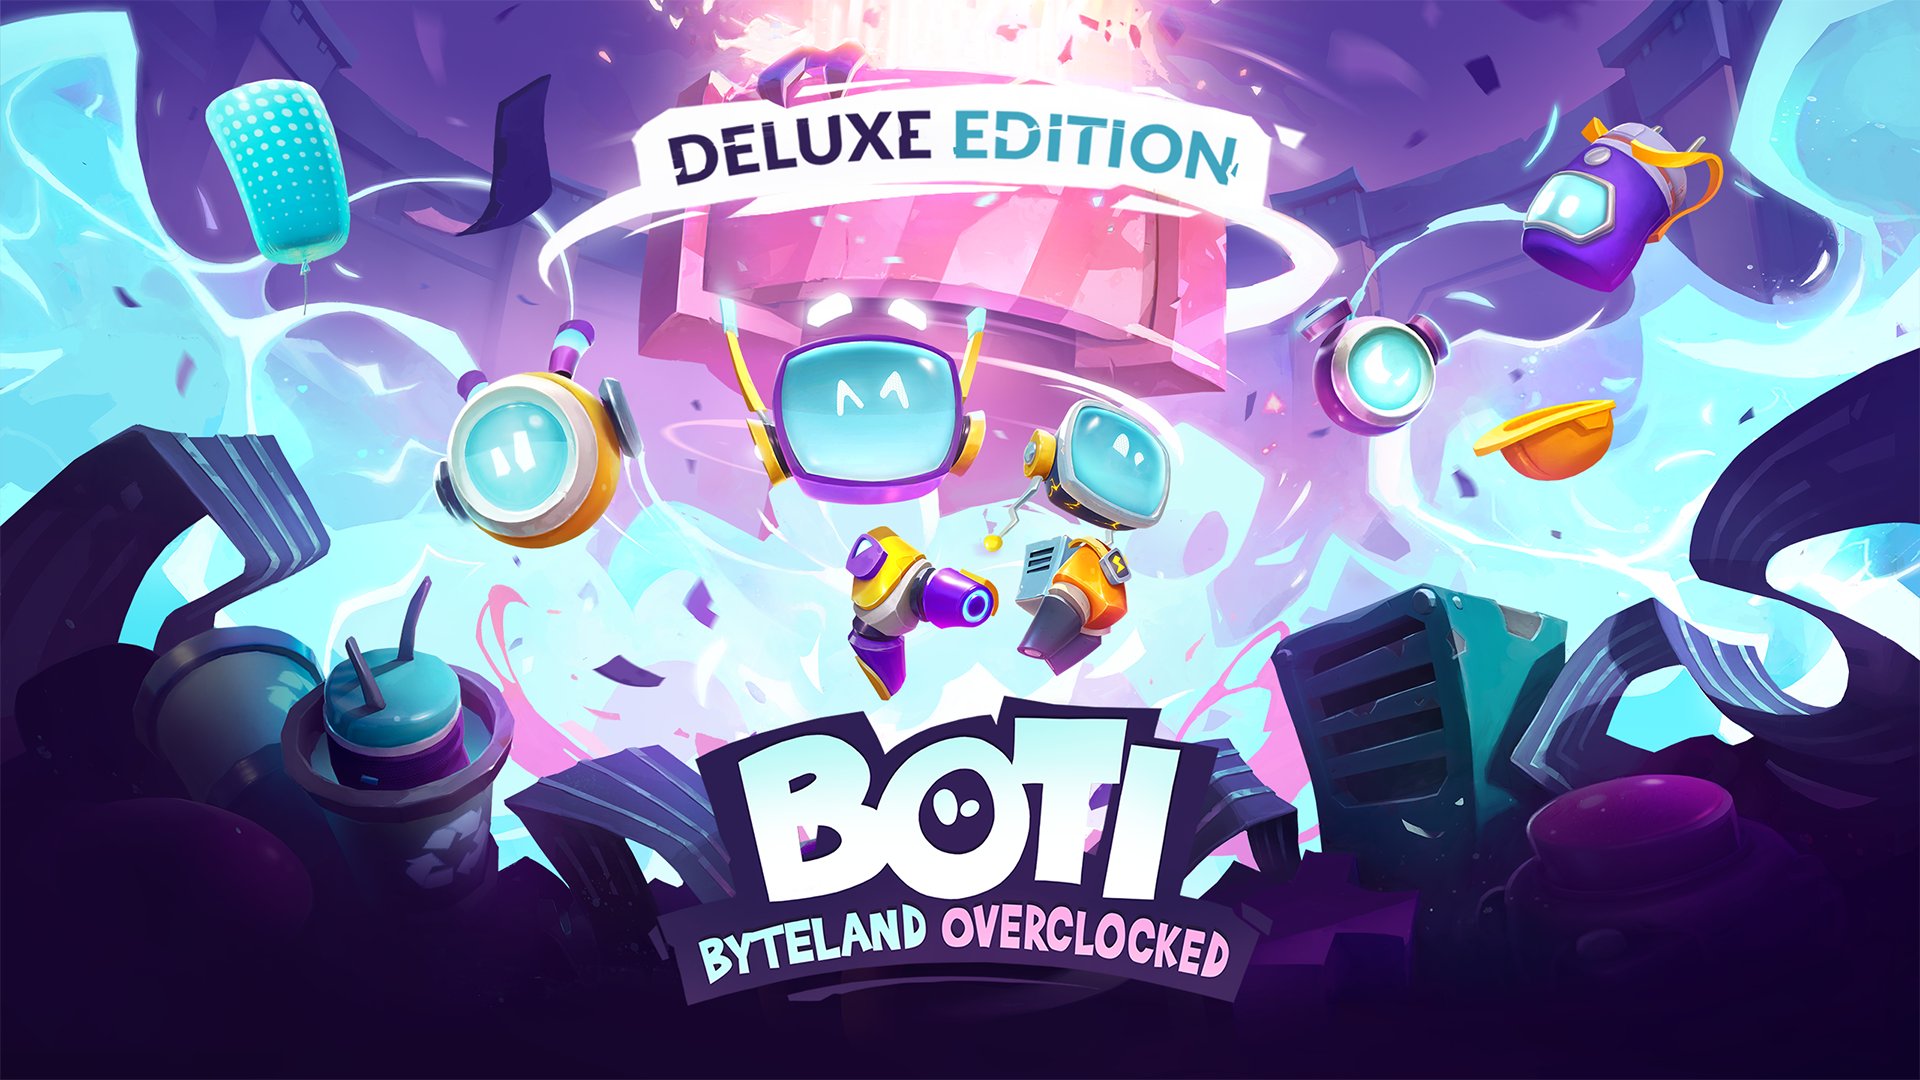 Boti: Byteland Overclocked on X: "Experience Byteland to its fullest with  the DELUXE EDITION! 🖥️ https://t.co/fzfVqpEP4K https://t.co/nFKG4SBgWx" / X